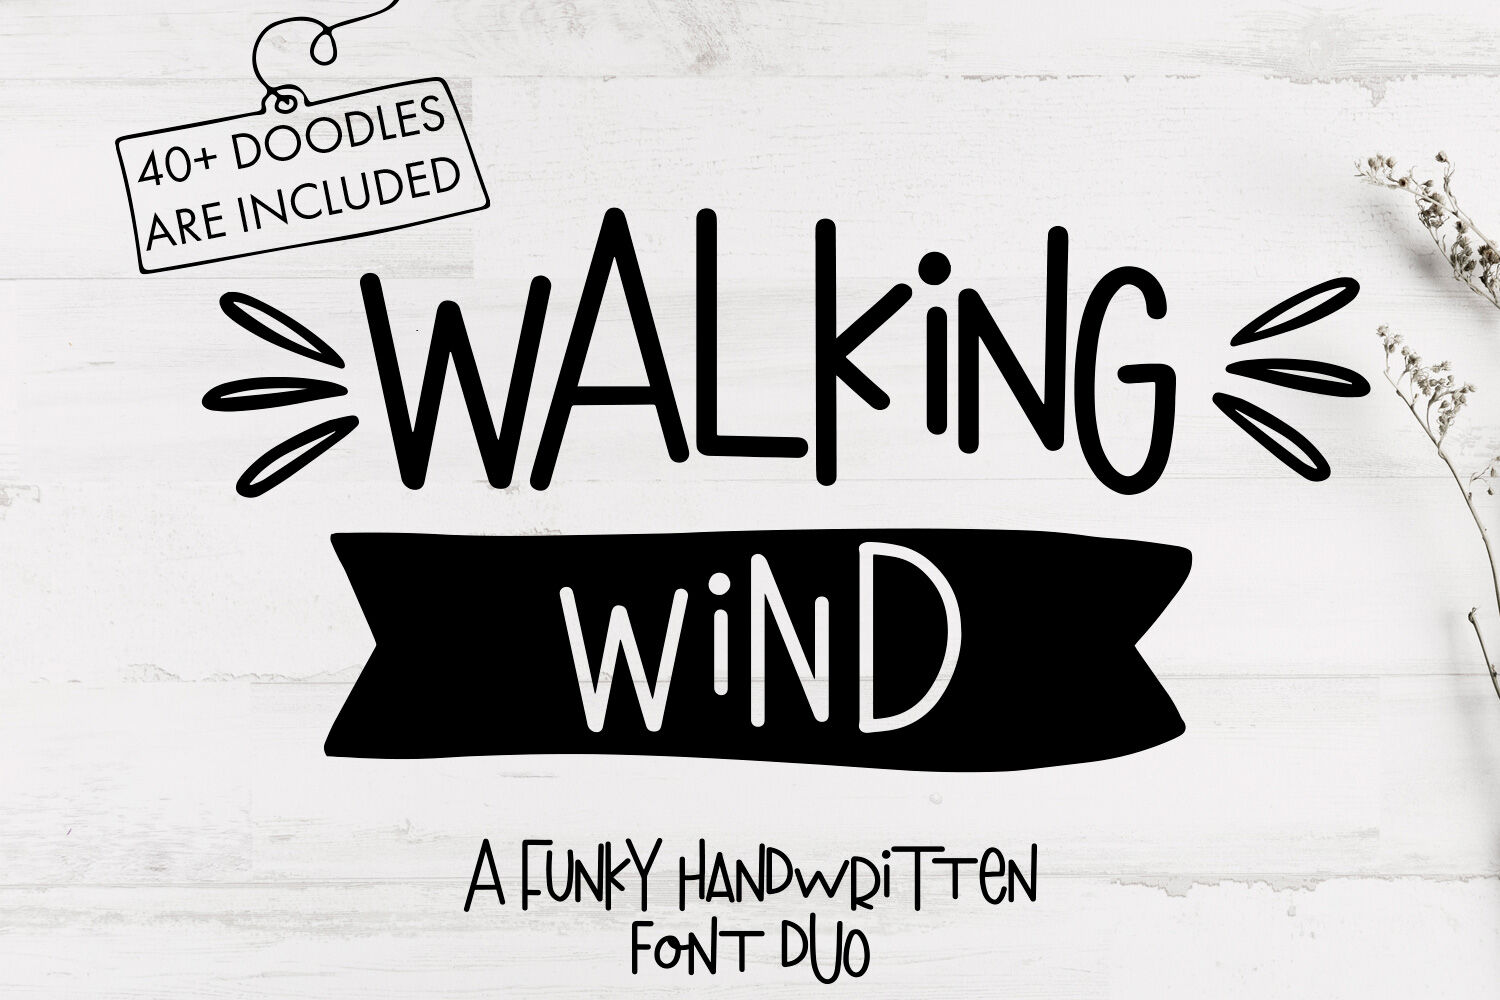 Walking Wind A Funky Handwritten Font Duo With Doodles By Freeling Design House Thehungryjpeg Com